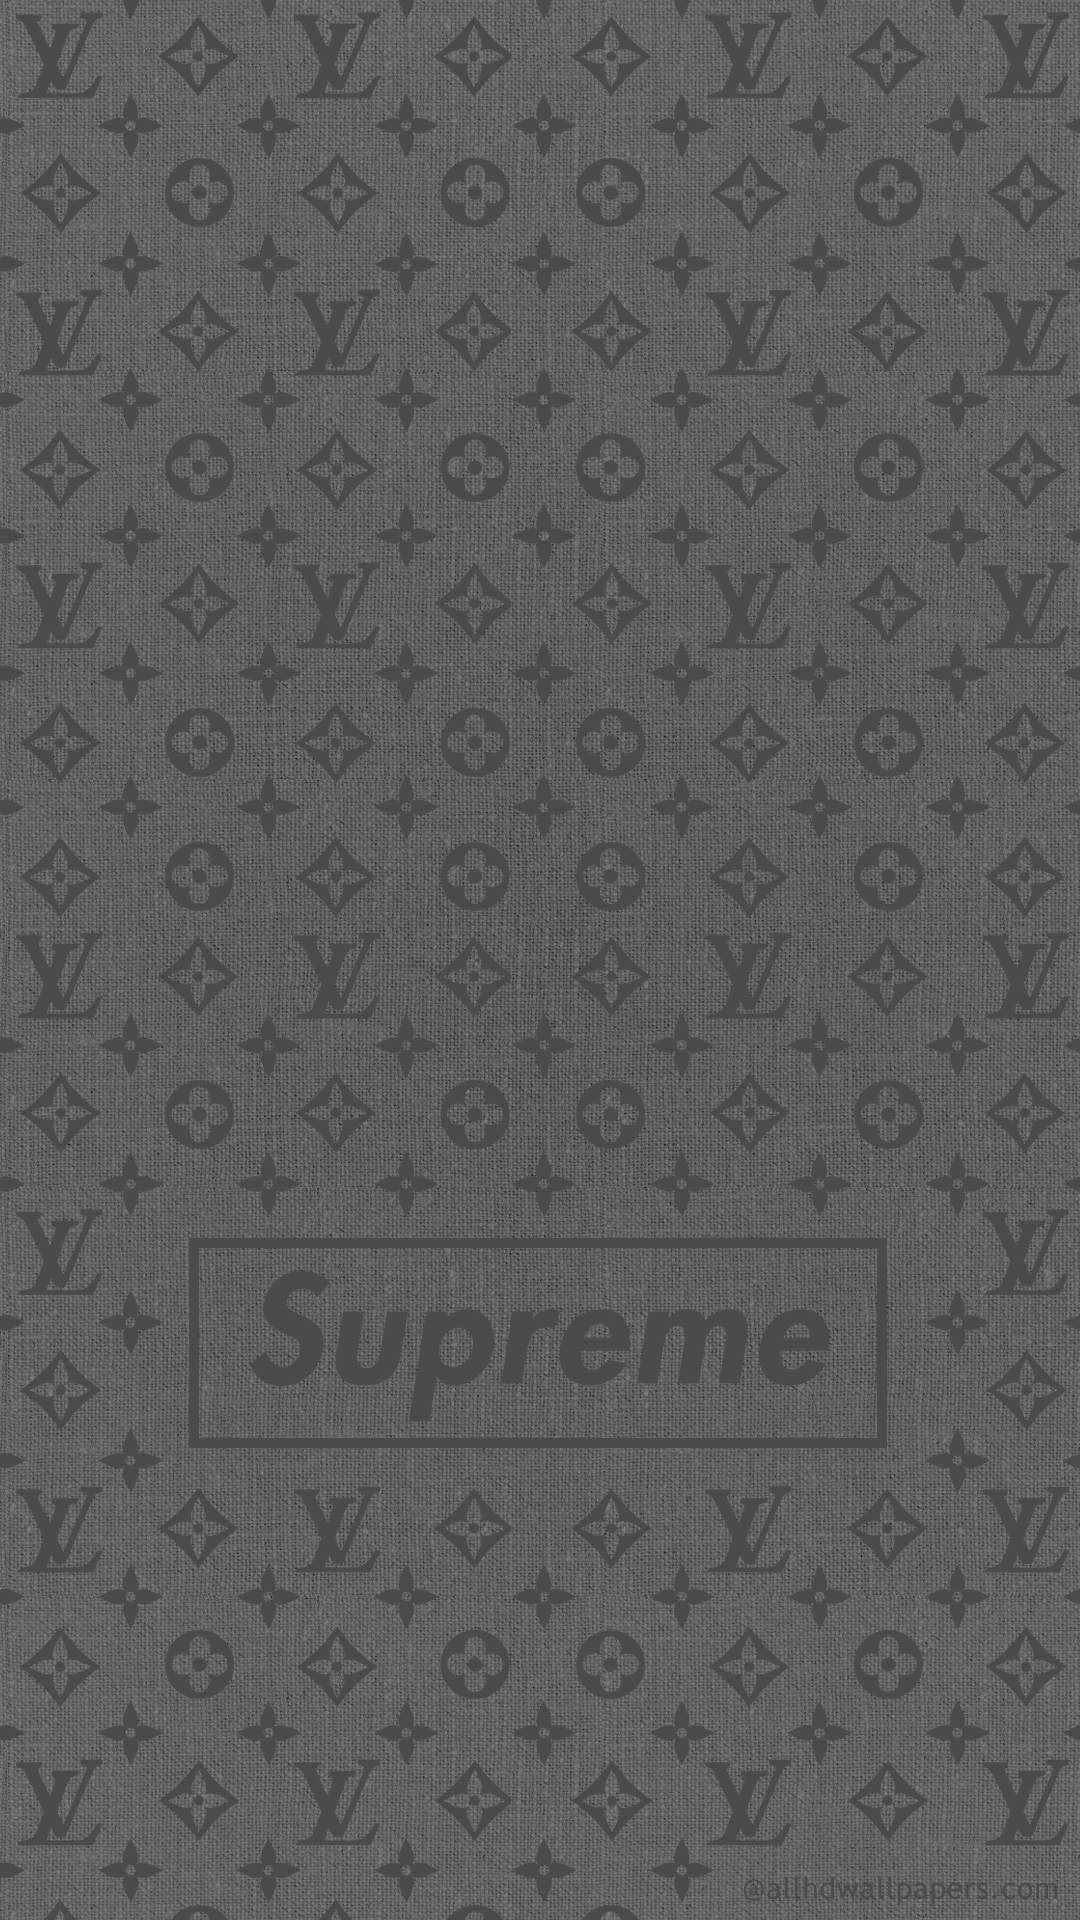 Free Download 70 Supreme Wallpapers In 4k Allhdwallpapers 1080x19 For Your Desktop Mobile Tablet Explore 43 Supreme Nyc Wallpaper Iphone Supreme Nyc Wallpaper Iphone Nyc Iphone Wallpaper Supreme Iphone Wallpapers